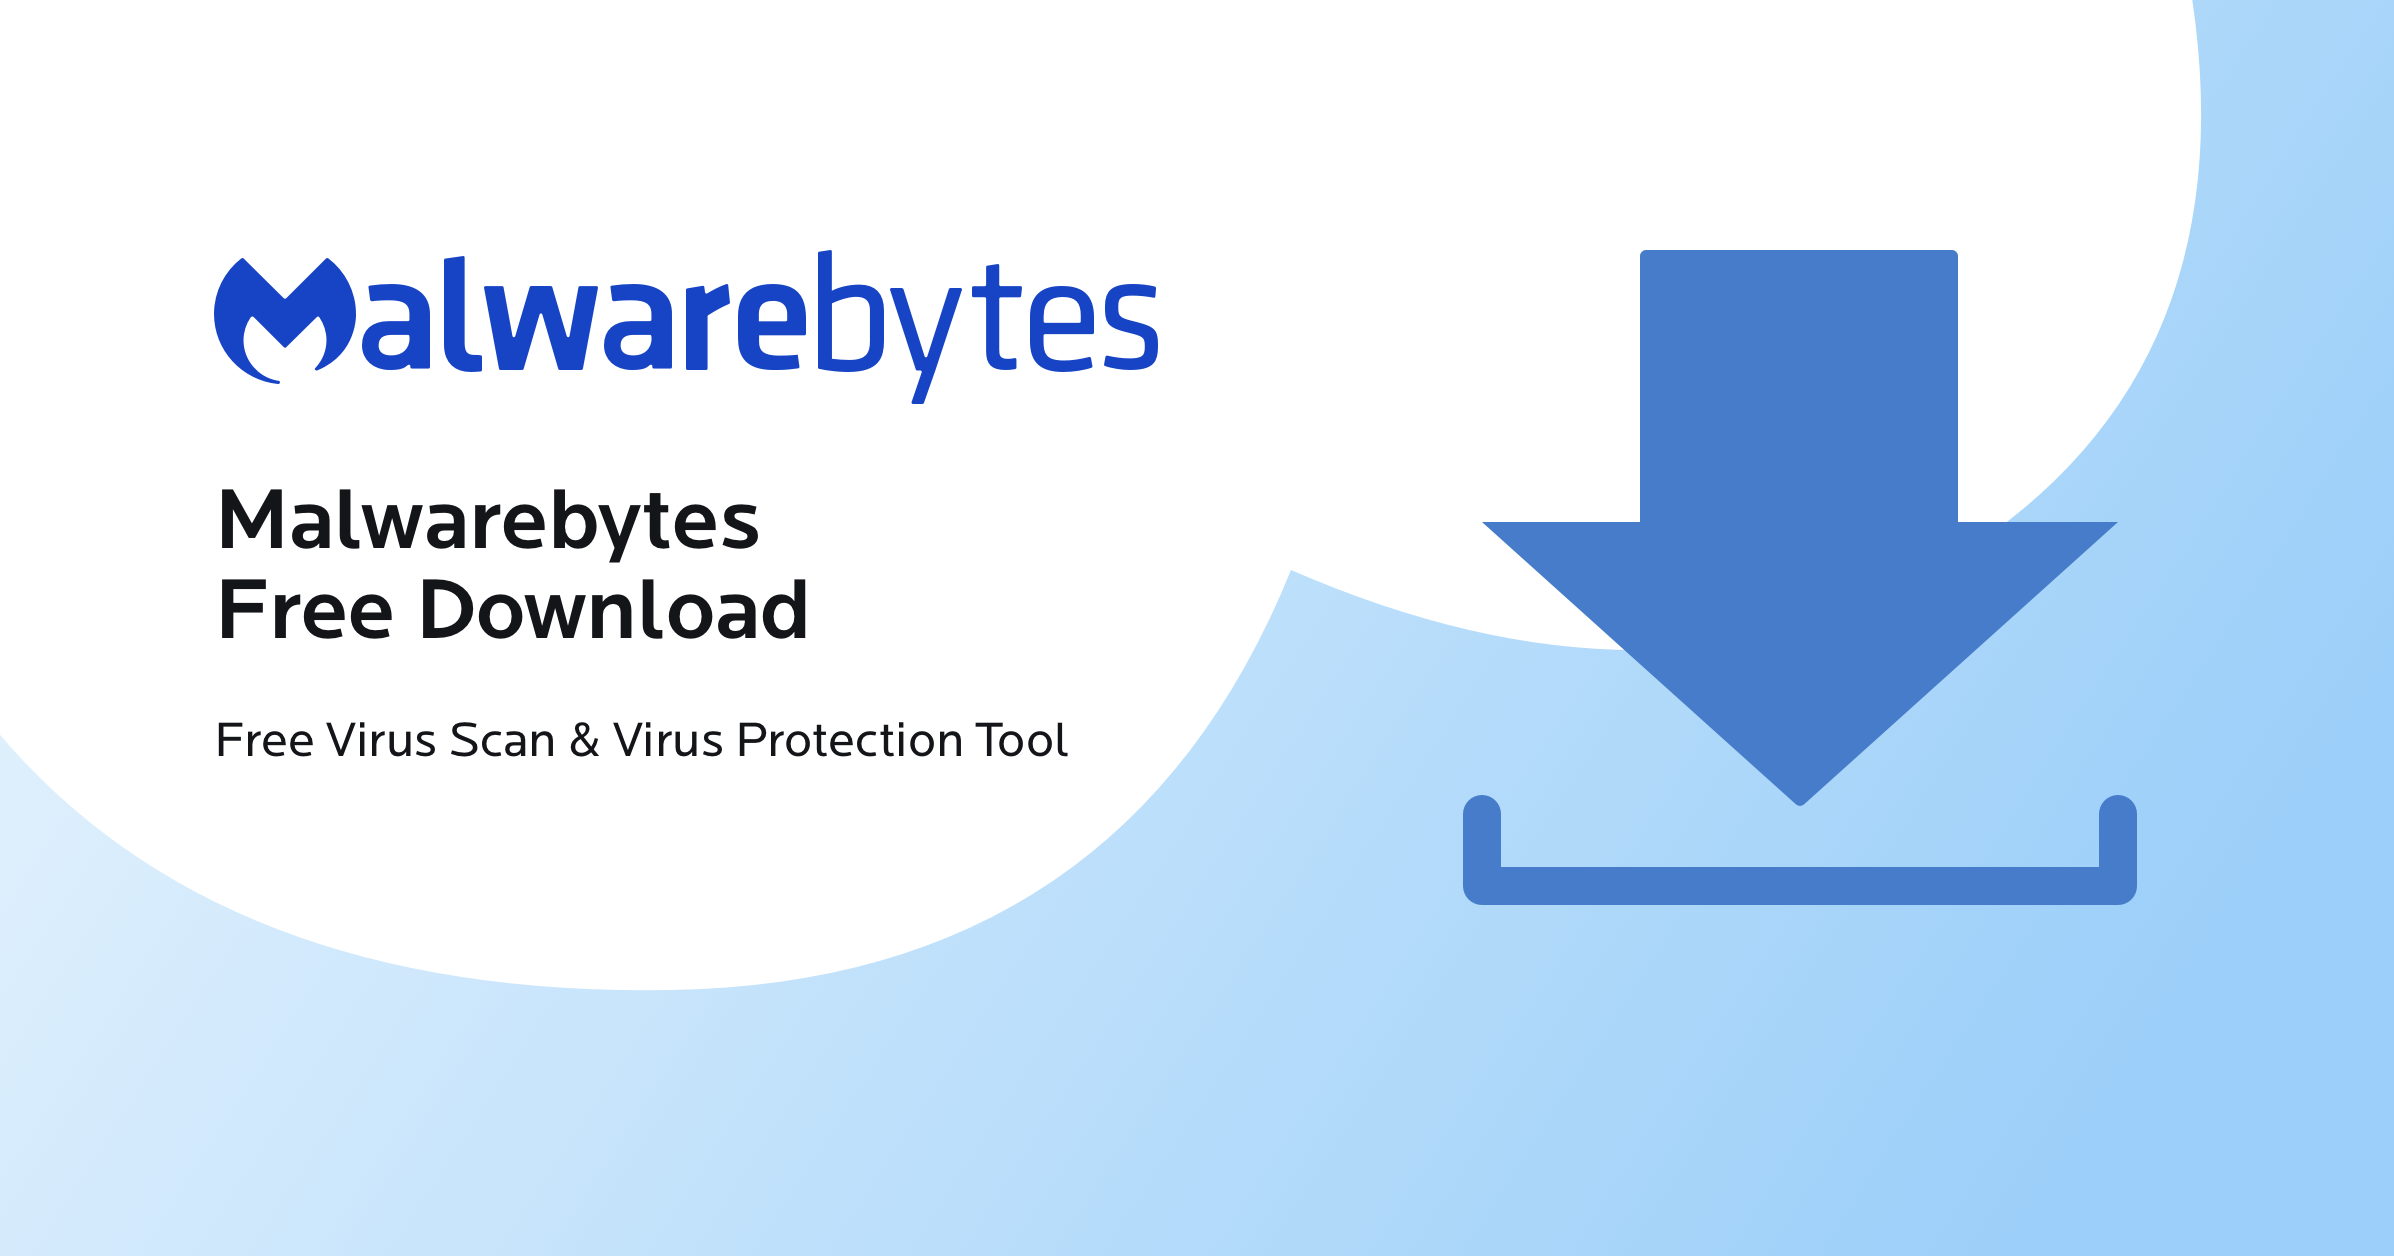 Download and install a trusted anti-malware program
Update the program and run a full scan of your system